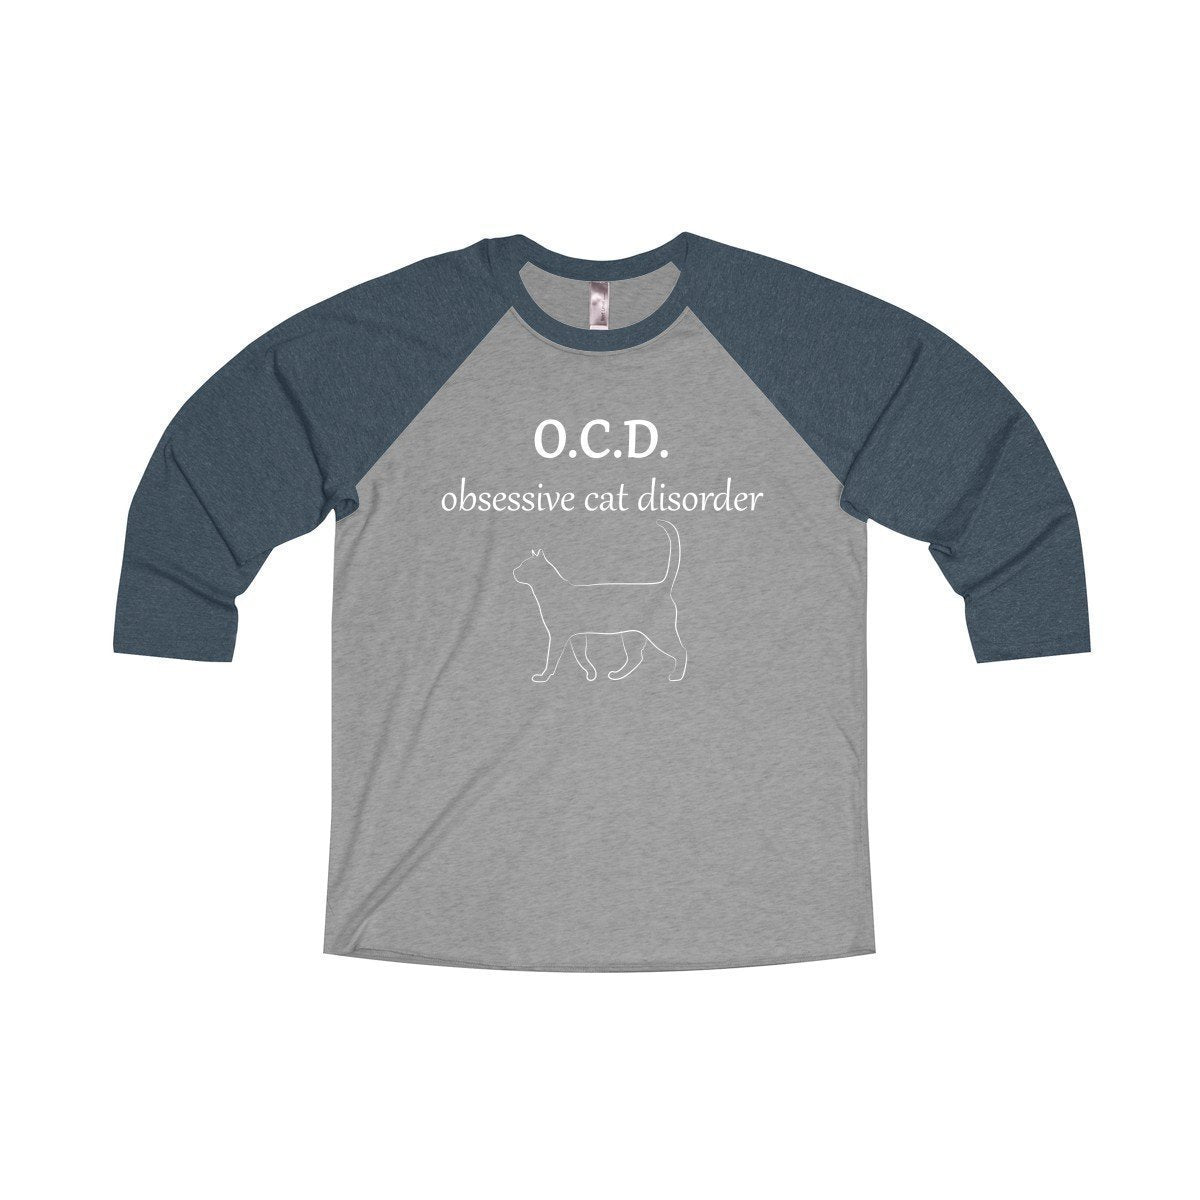 Crazy Cat Shirts, Funny Cat Shirt with the Print O.C.D. Obsessive Cat Disorder Across the Front